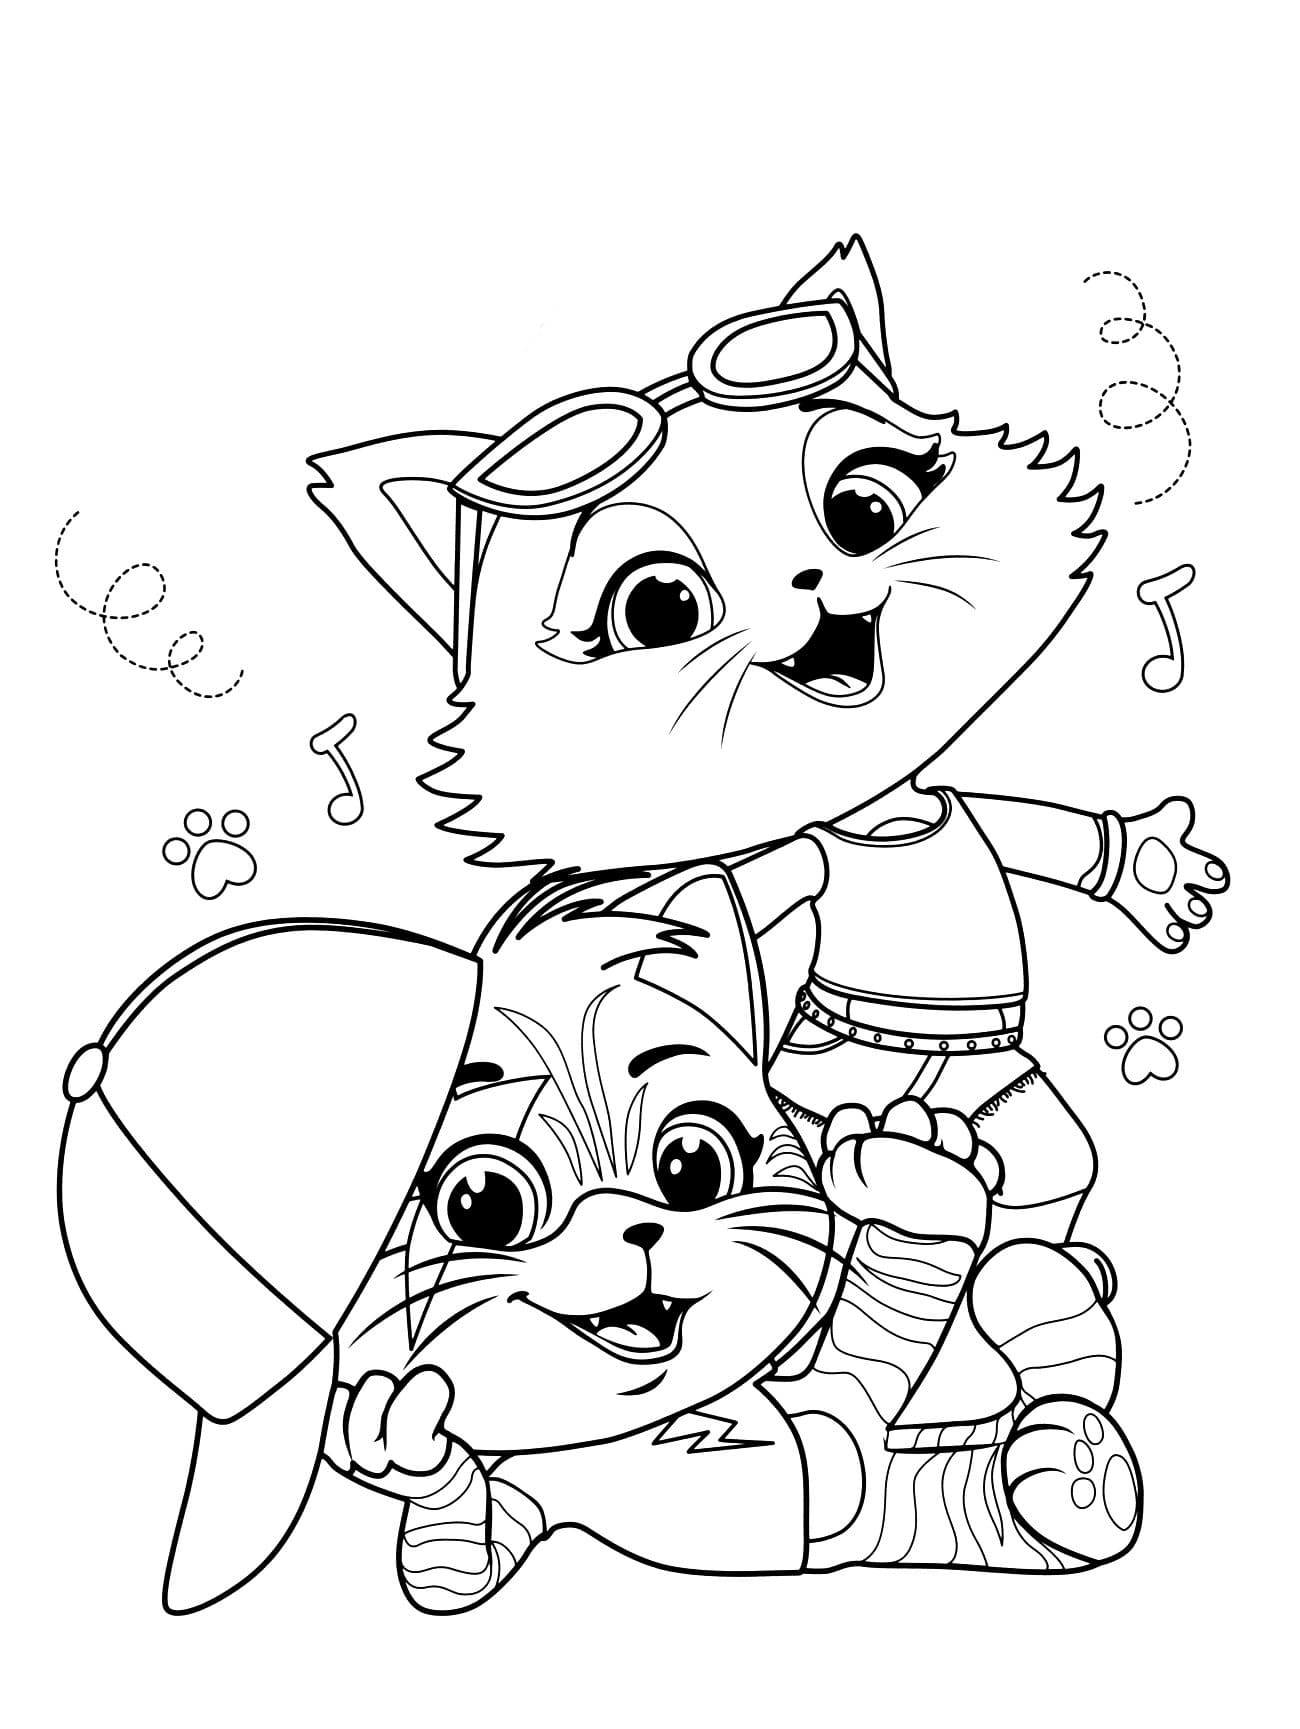 cats the musical coloring pages